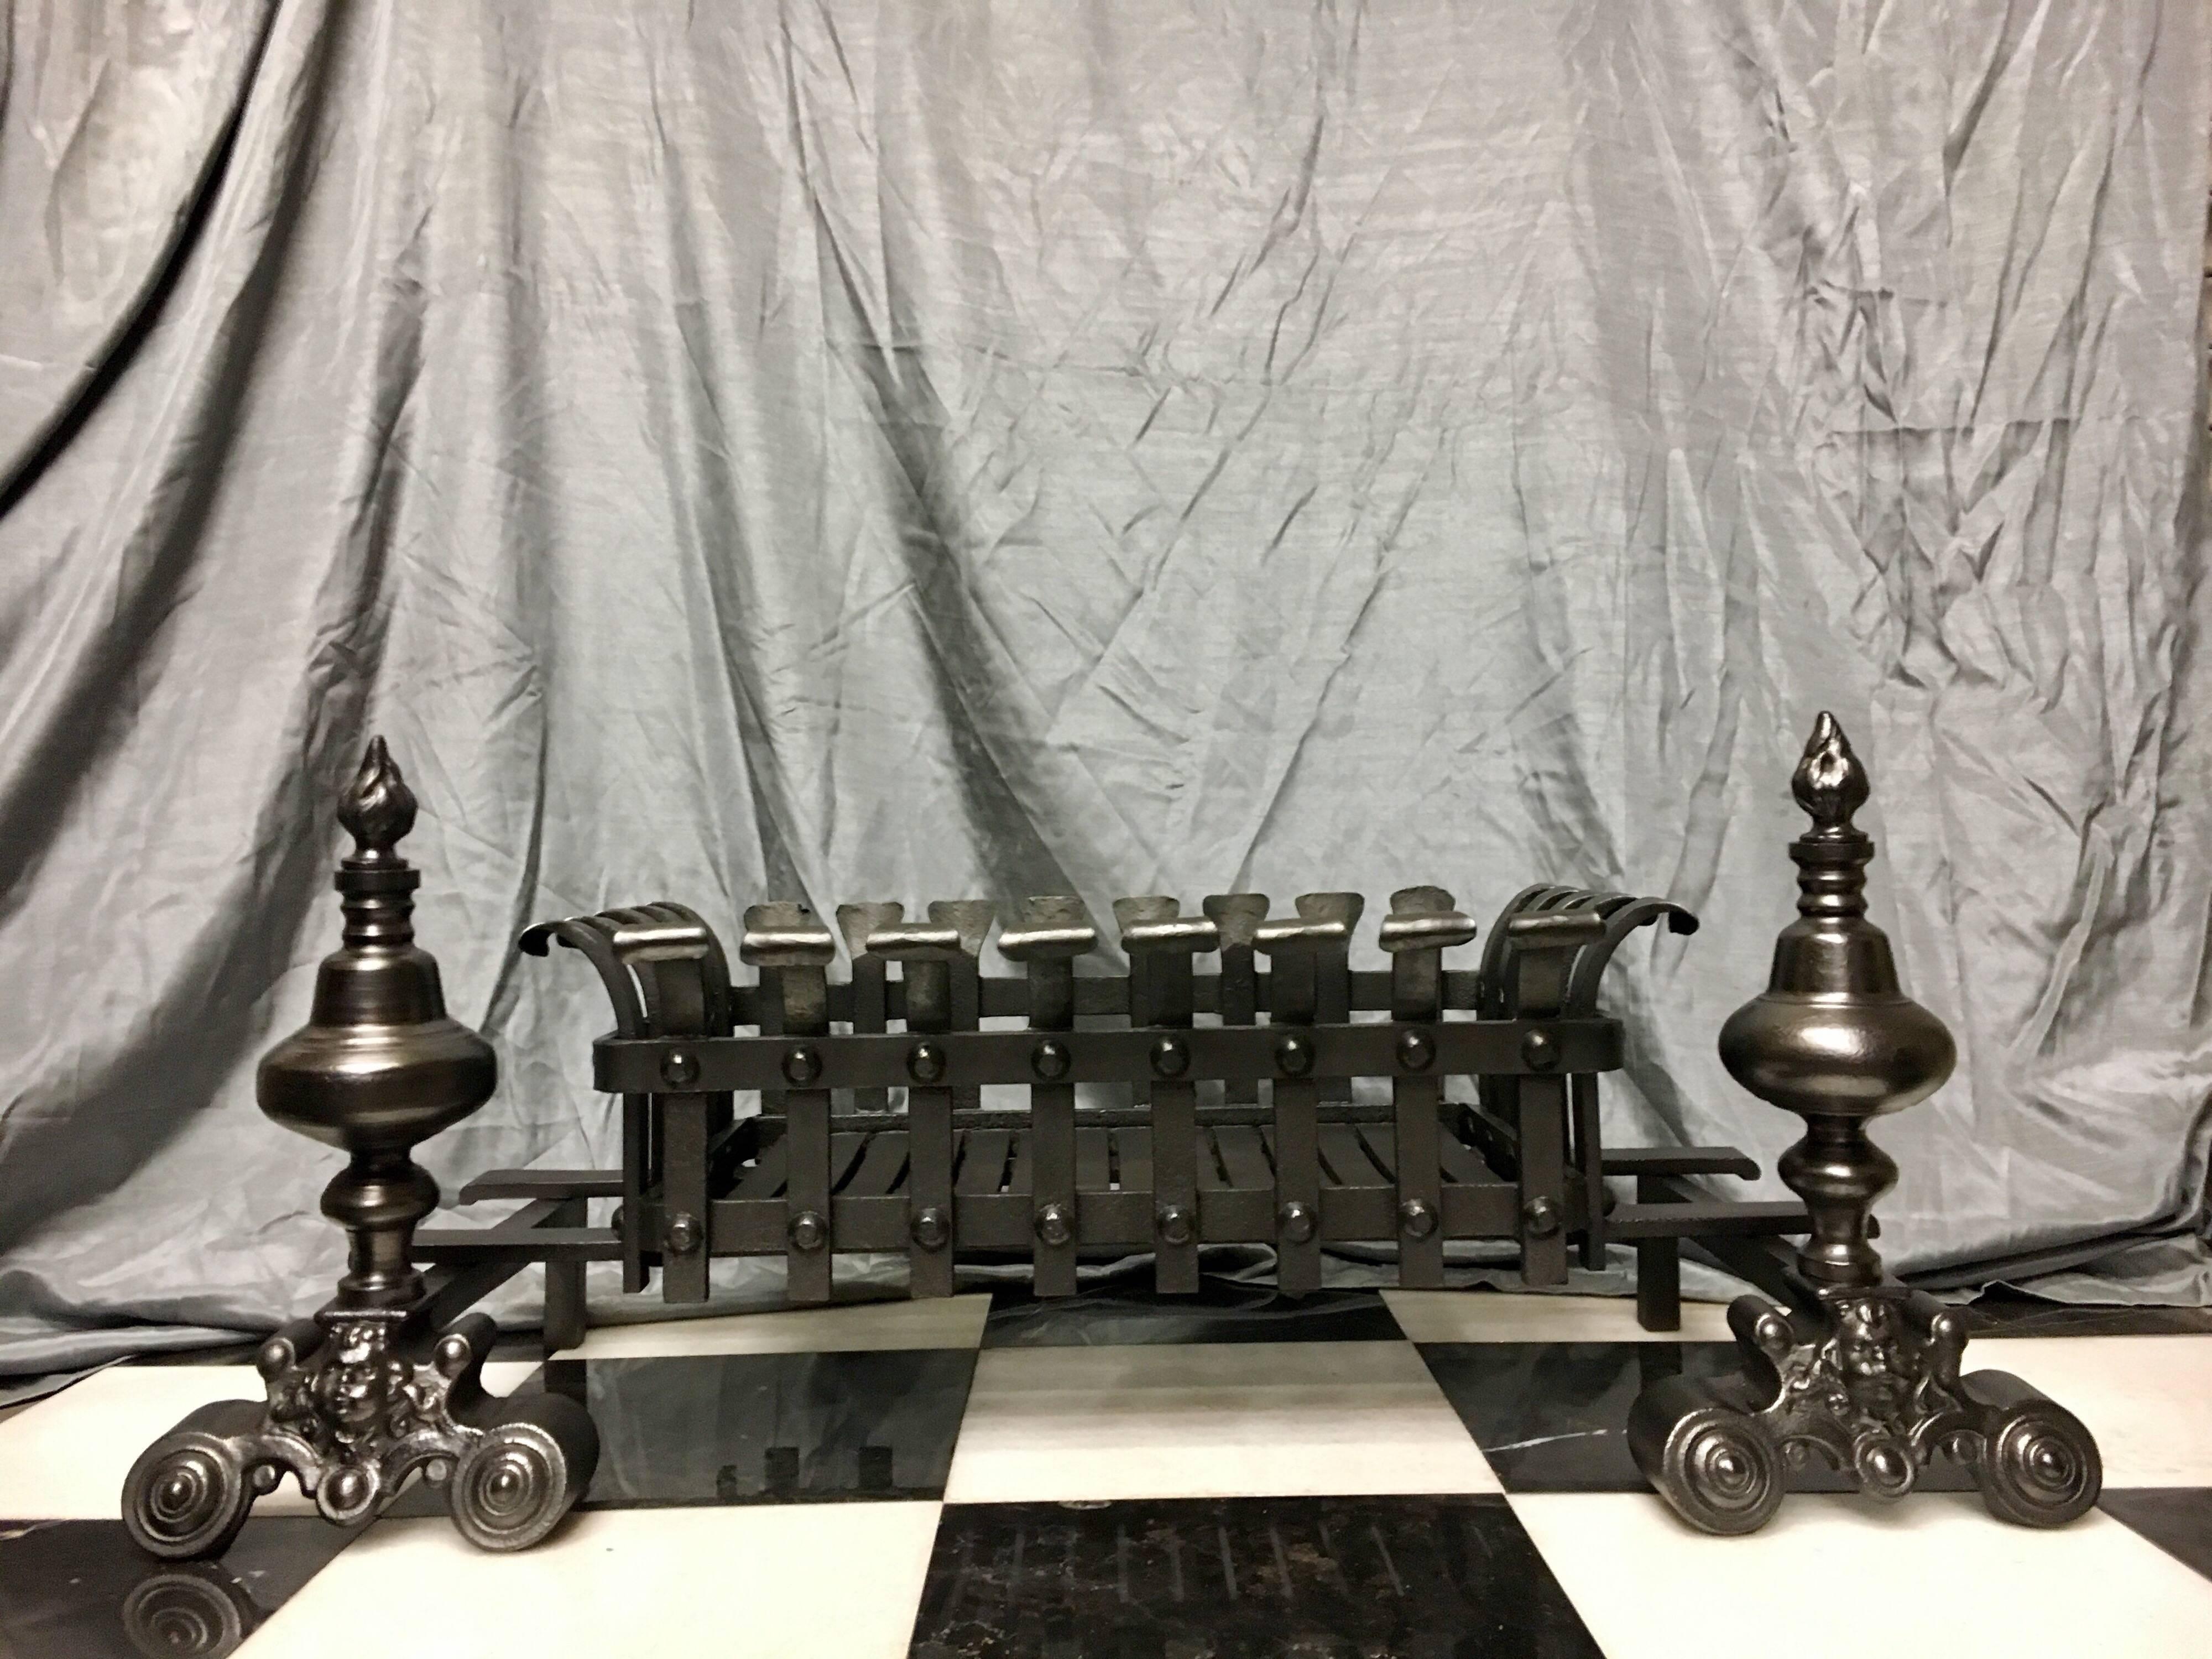 A large antique 19th century cast and wrought Iron fire basket grate in the Baroque manor, this piece may be moved in or out to different widths to accommodate various chamber openings. Salvaged originally from Pilrig House, Edinburgh, Scotland- the